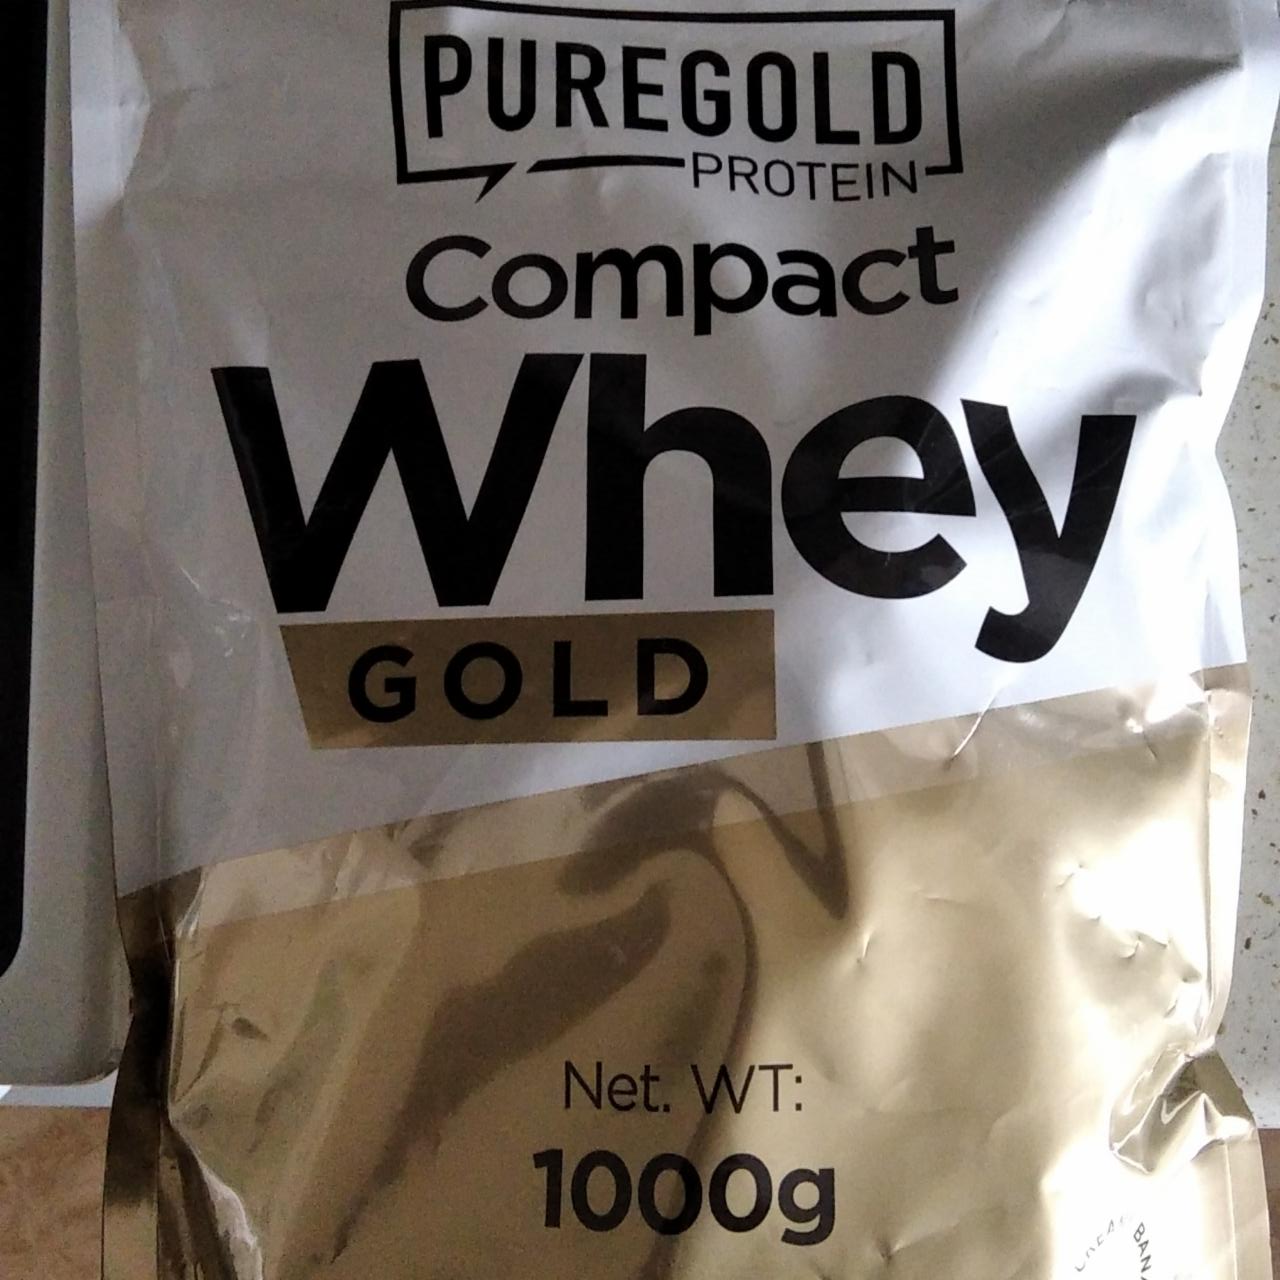 Fotografie - Compact whey gold banana Puregold protein